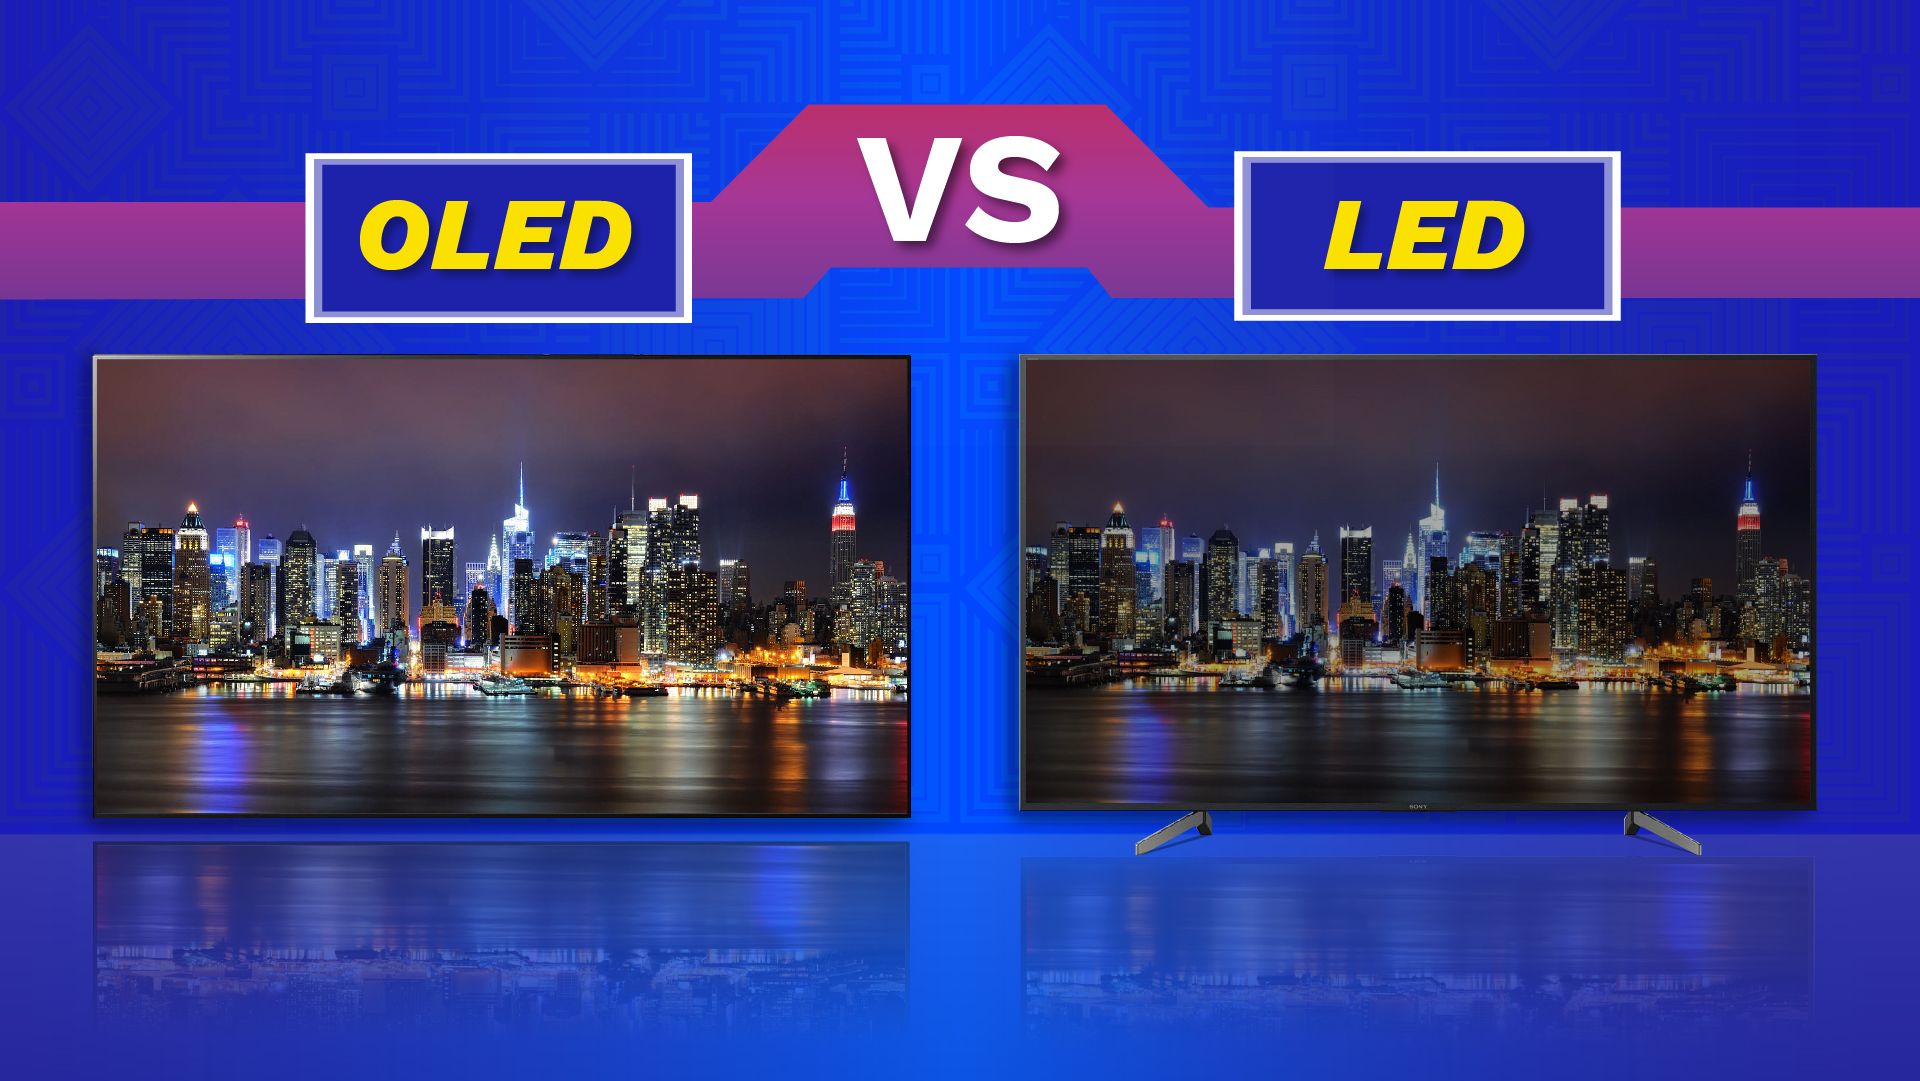 What Is The Difference Between OLED And LED TV